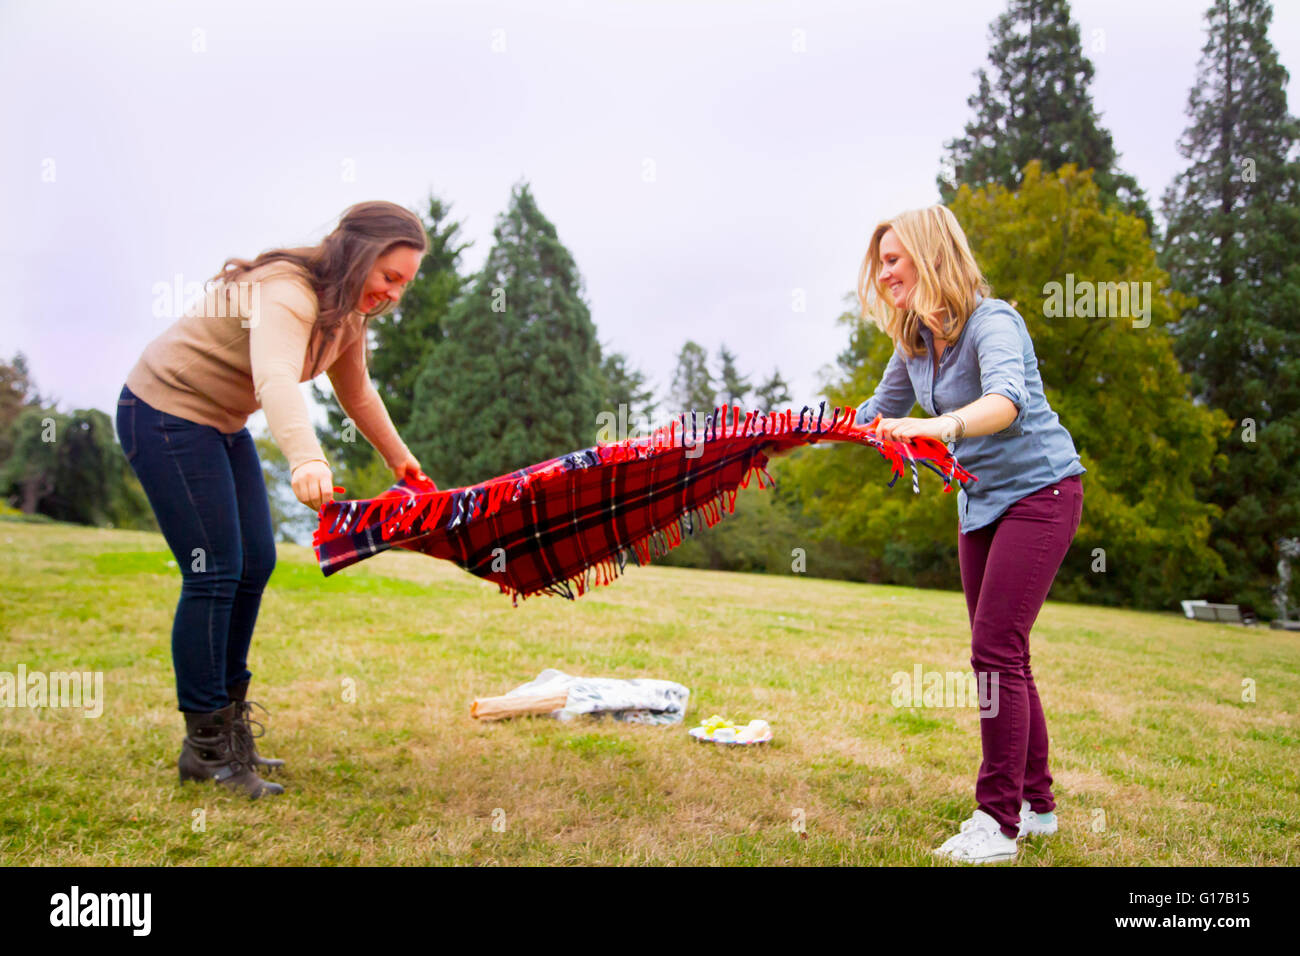 Two young women setting out picnic blanket in park Stock Photo